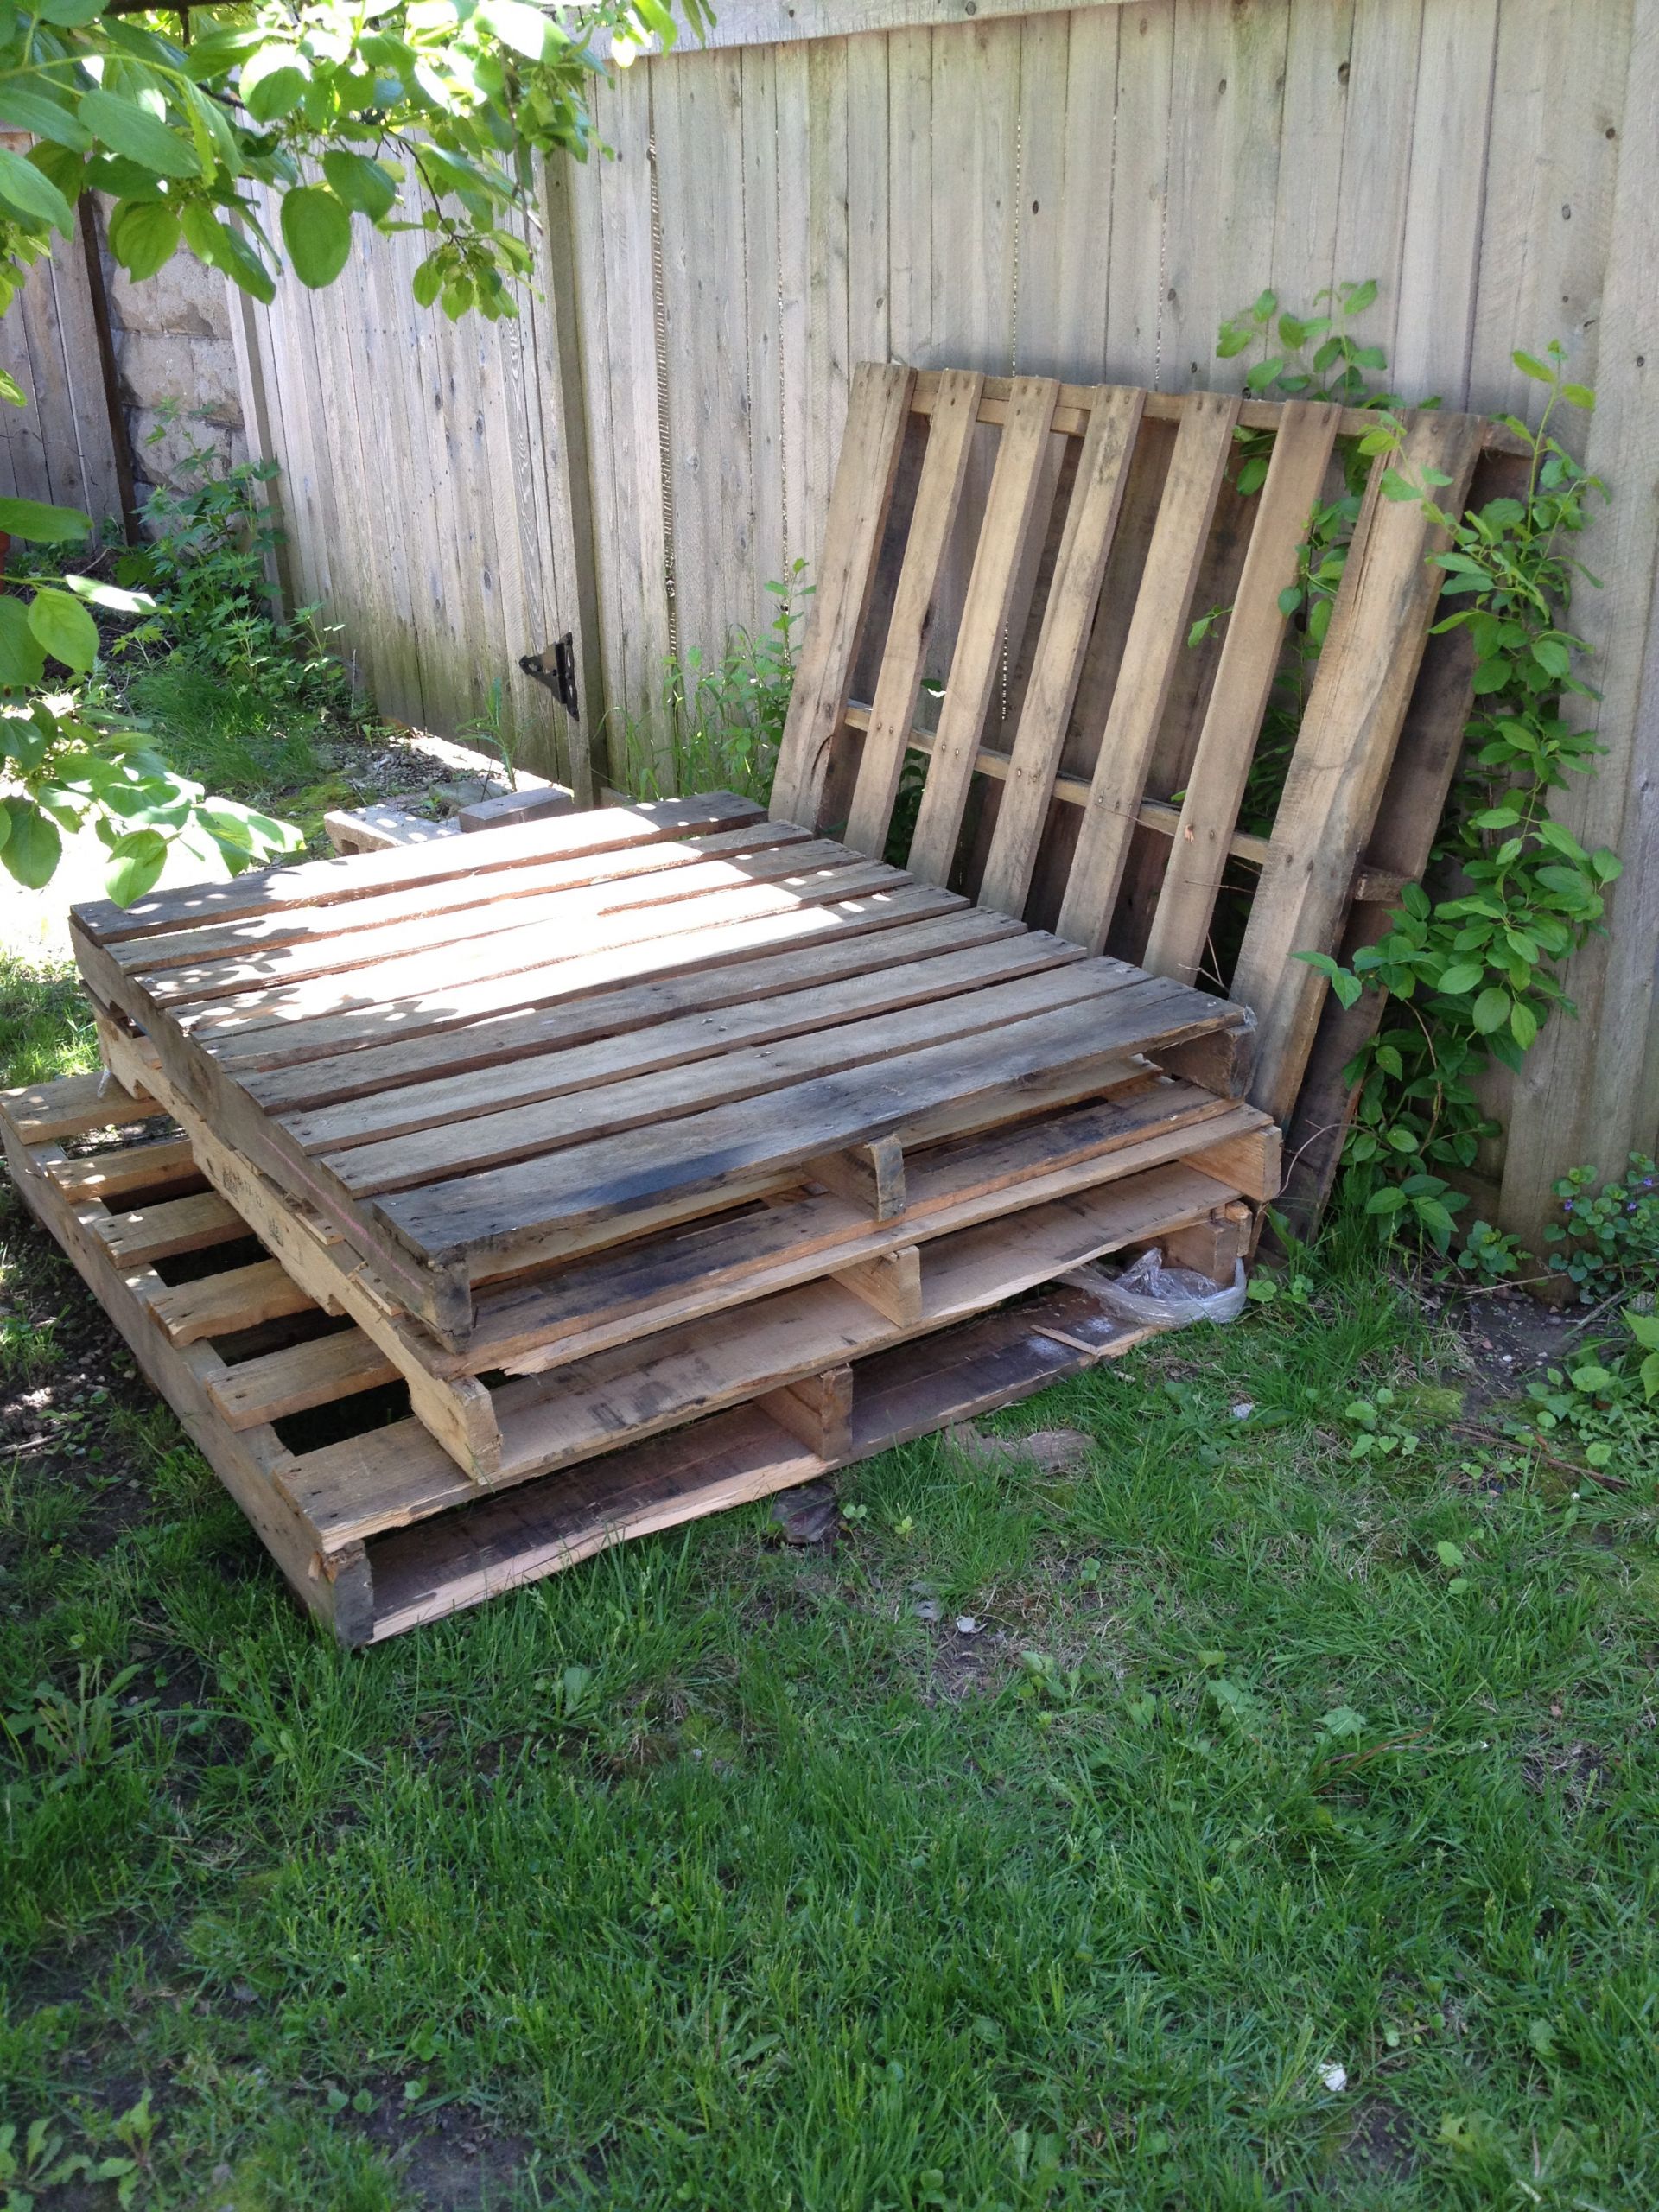 Pallet Backyard Furniture
 Temporary Outdoor Sofa with Pallets